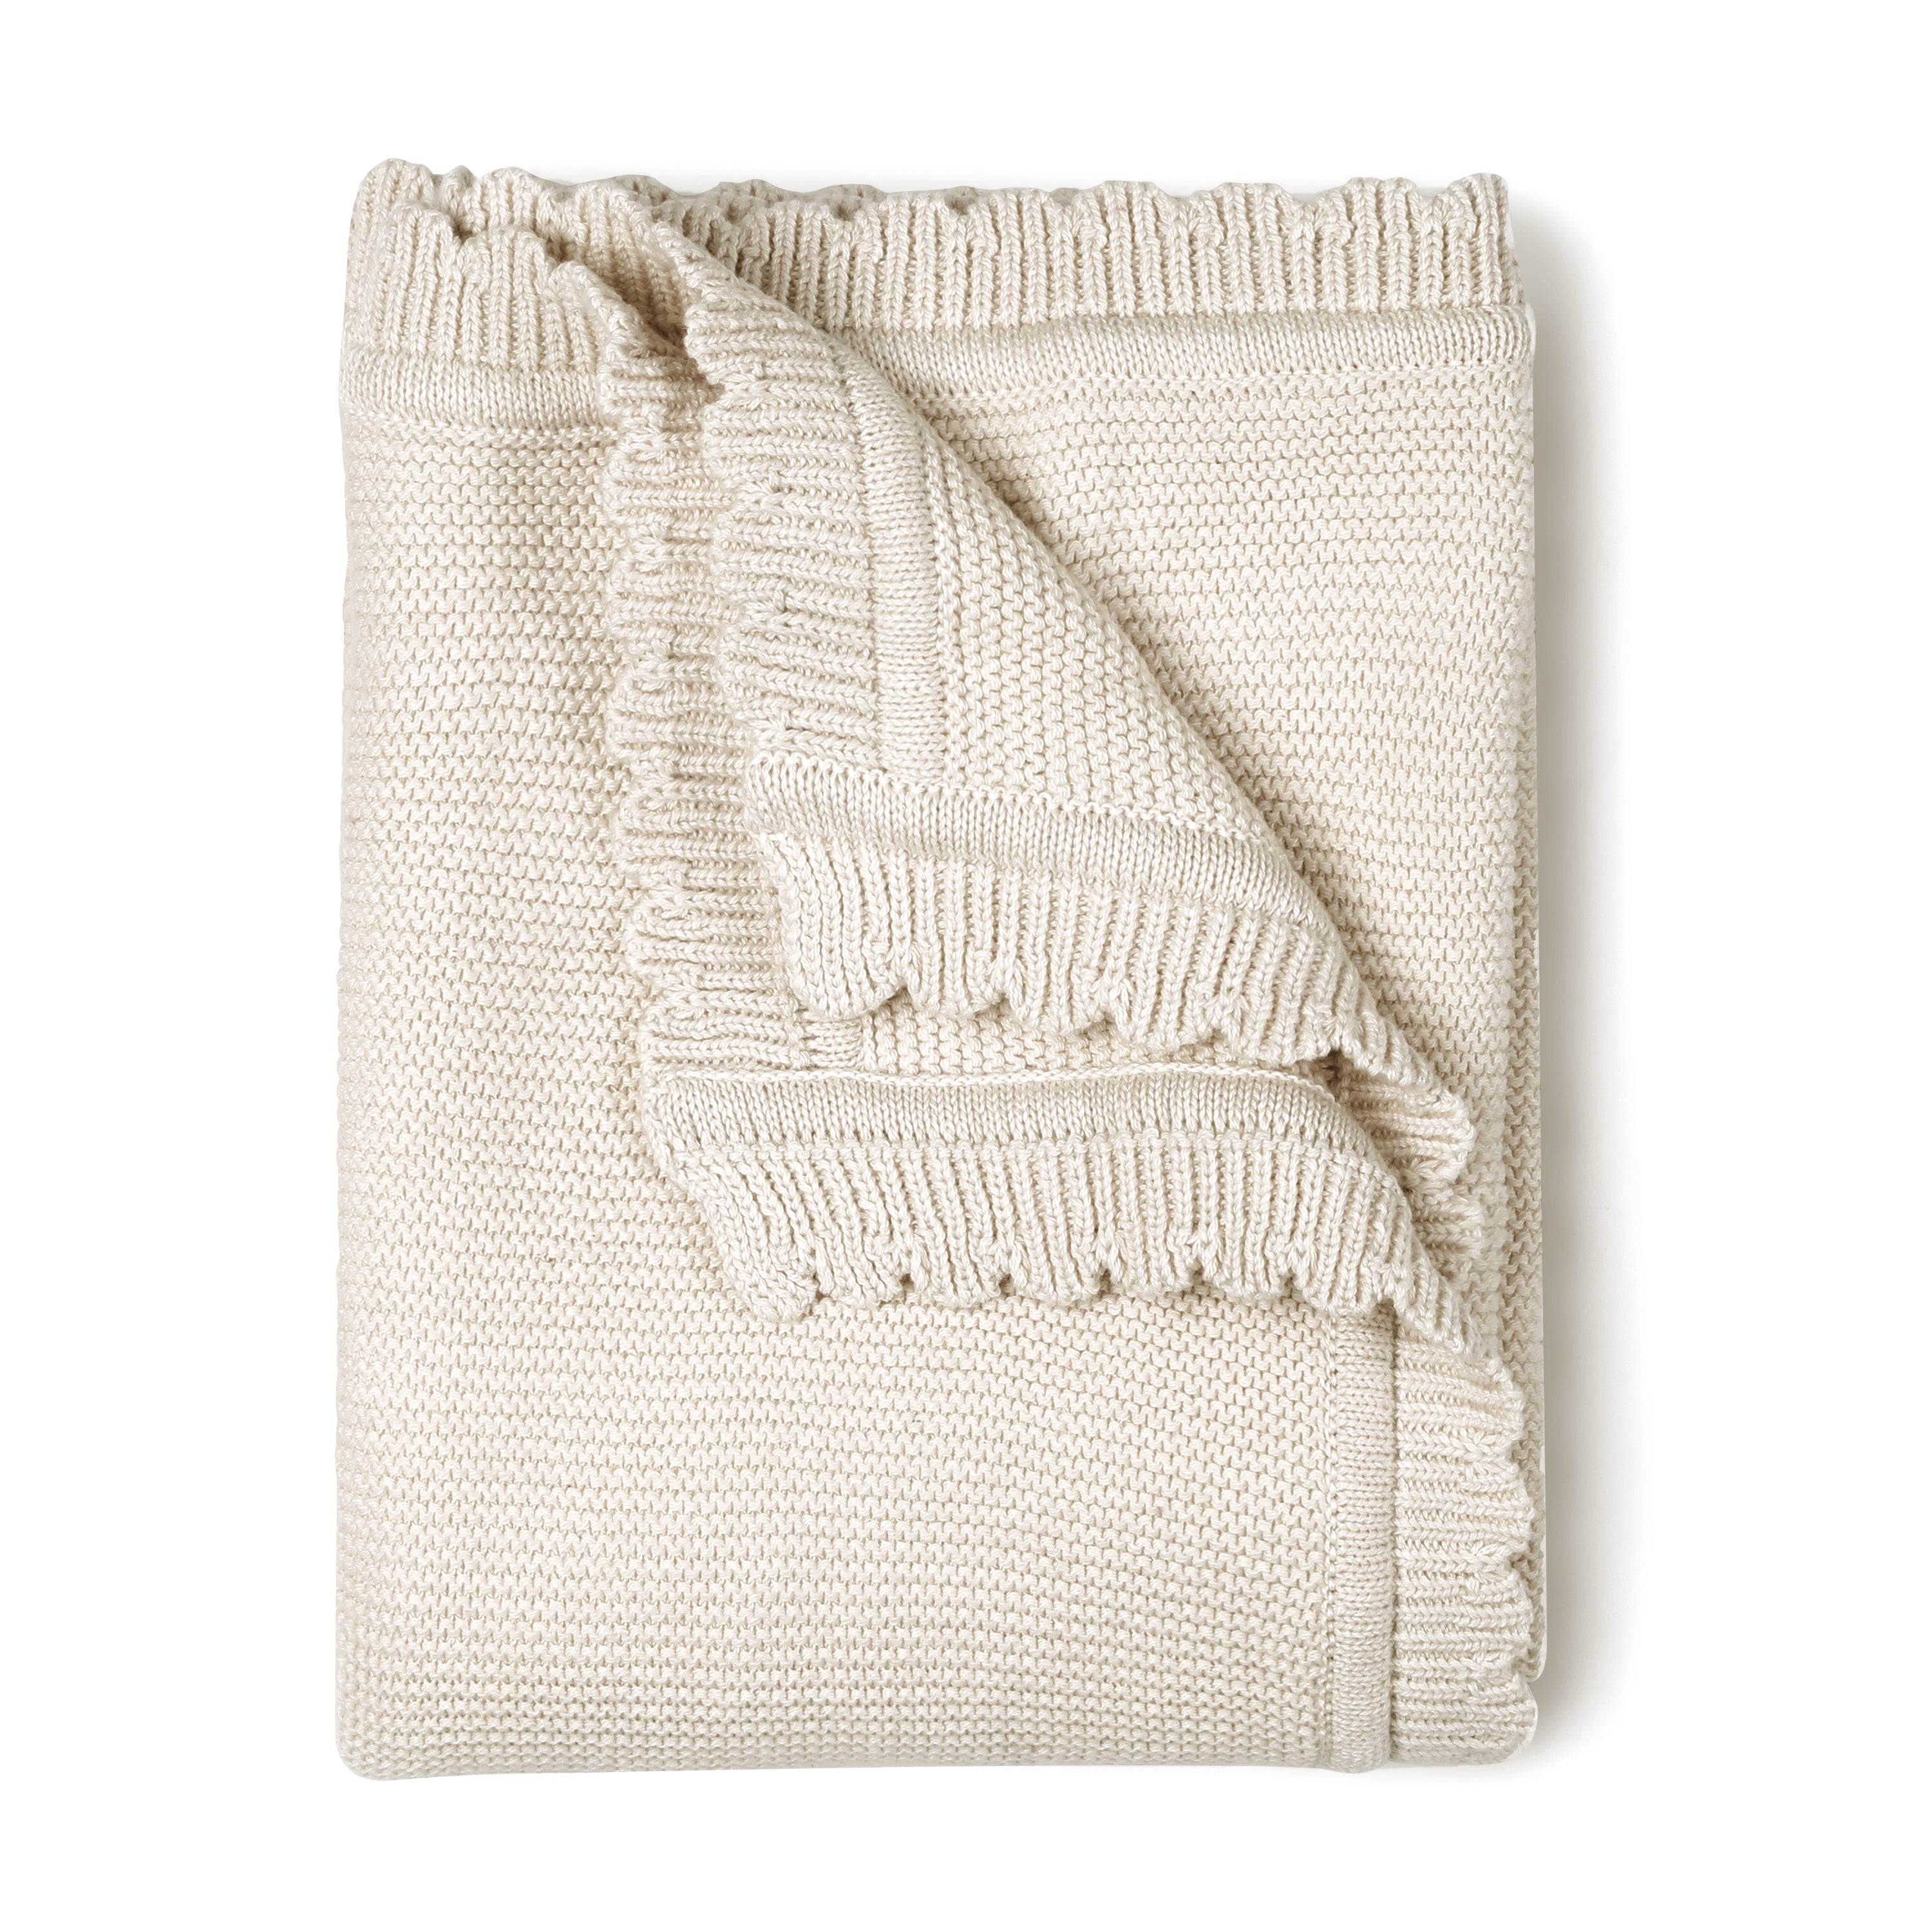 A neatly folded Organic Cotton Scalloped Baby Blanket in Vanilla Natural from Makemake Organics with a textured pattern, partially unfolded at one corner to reveal its design.